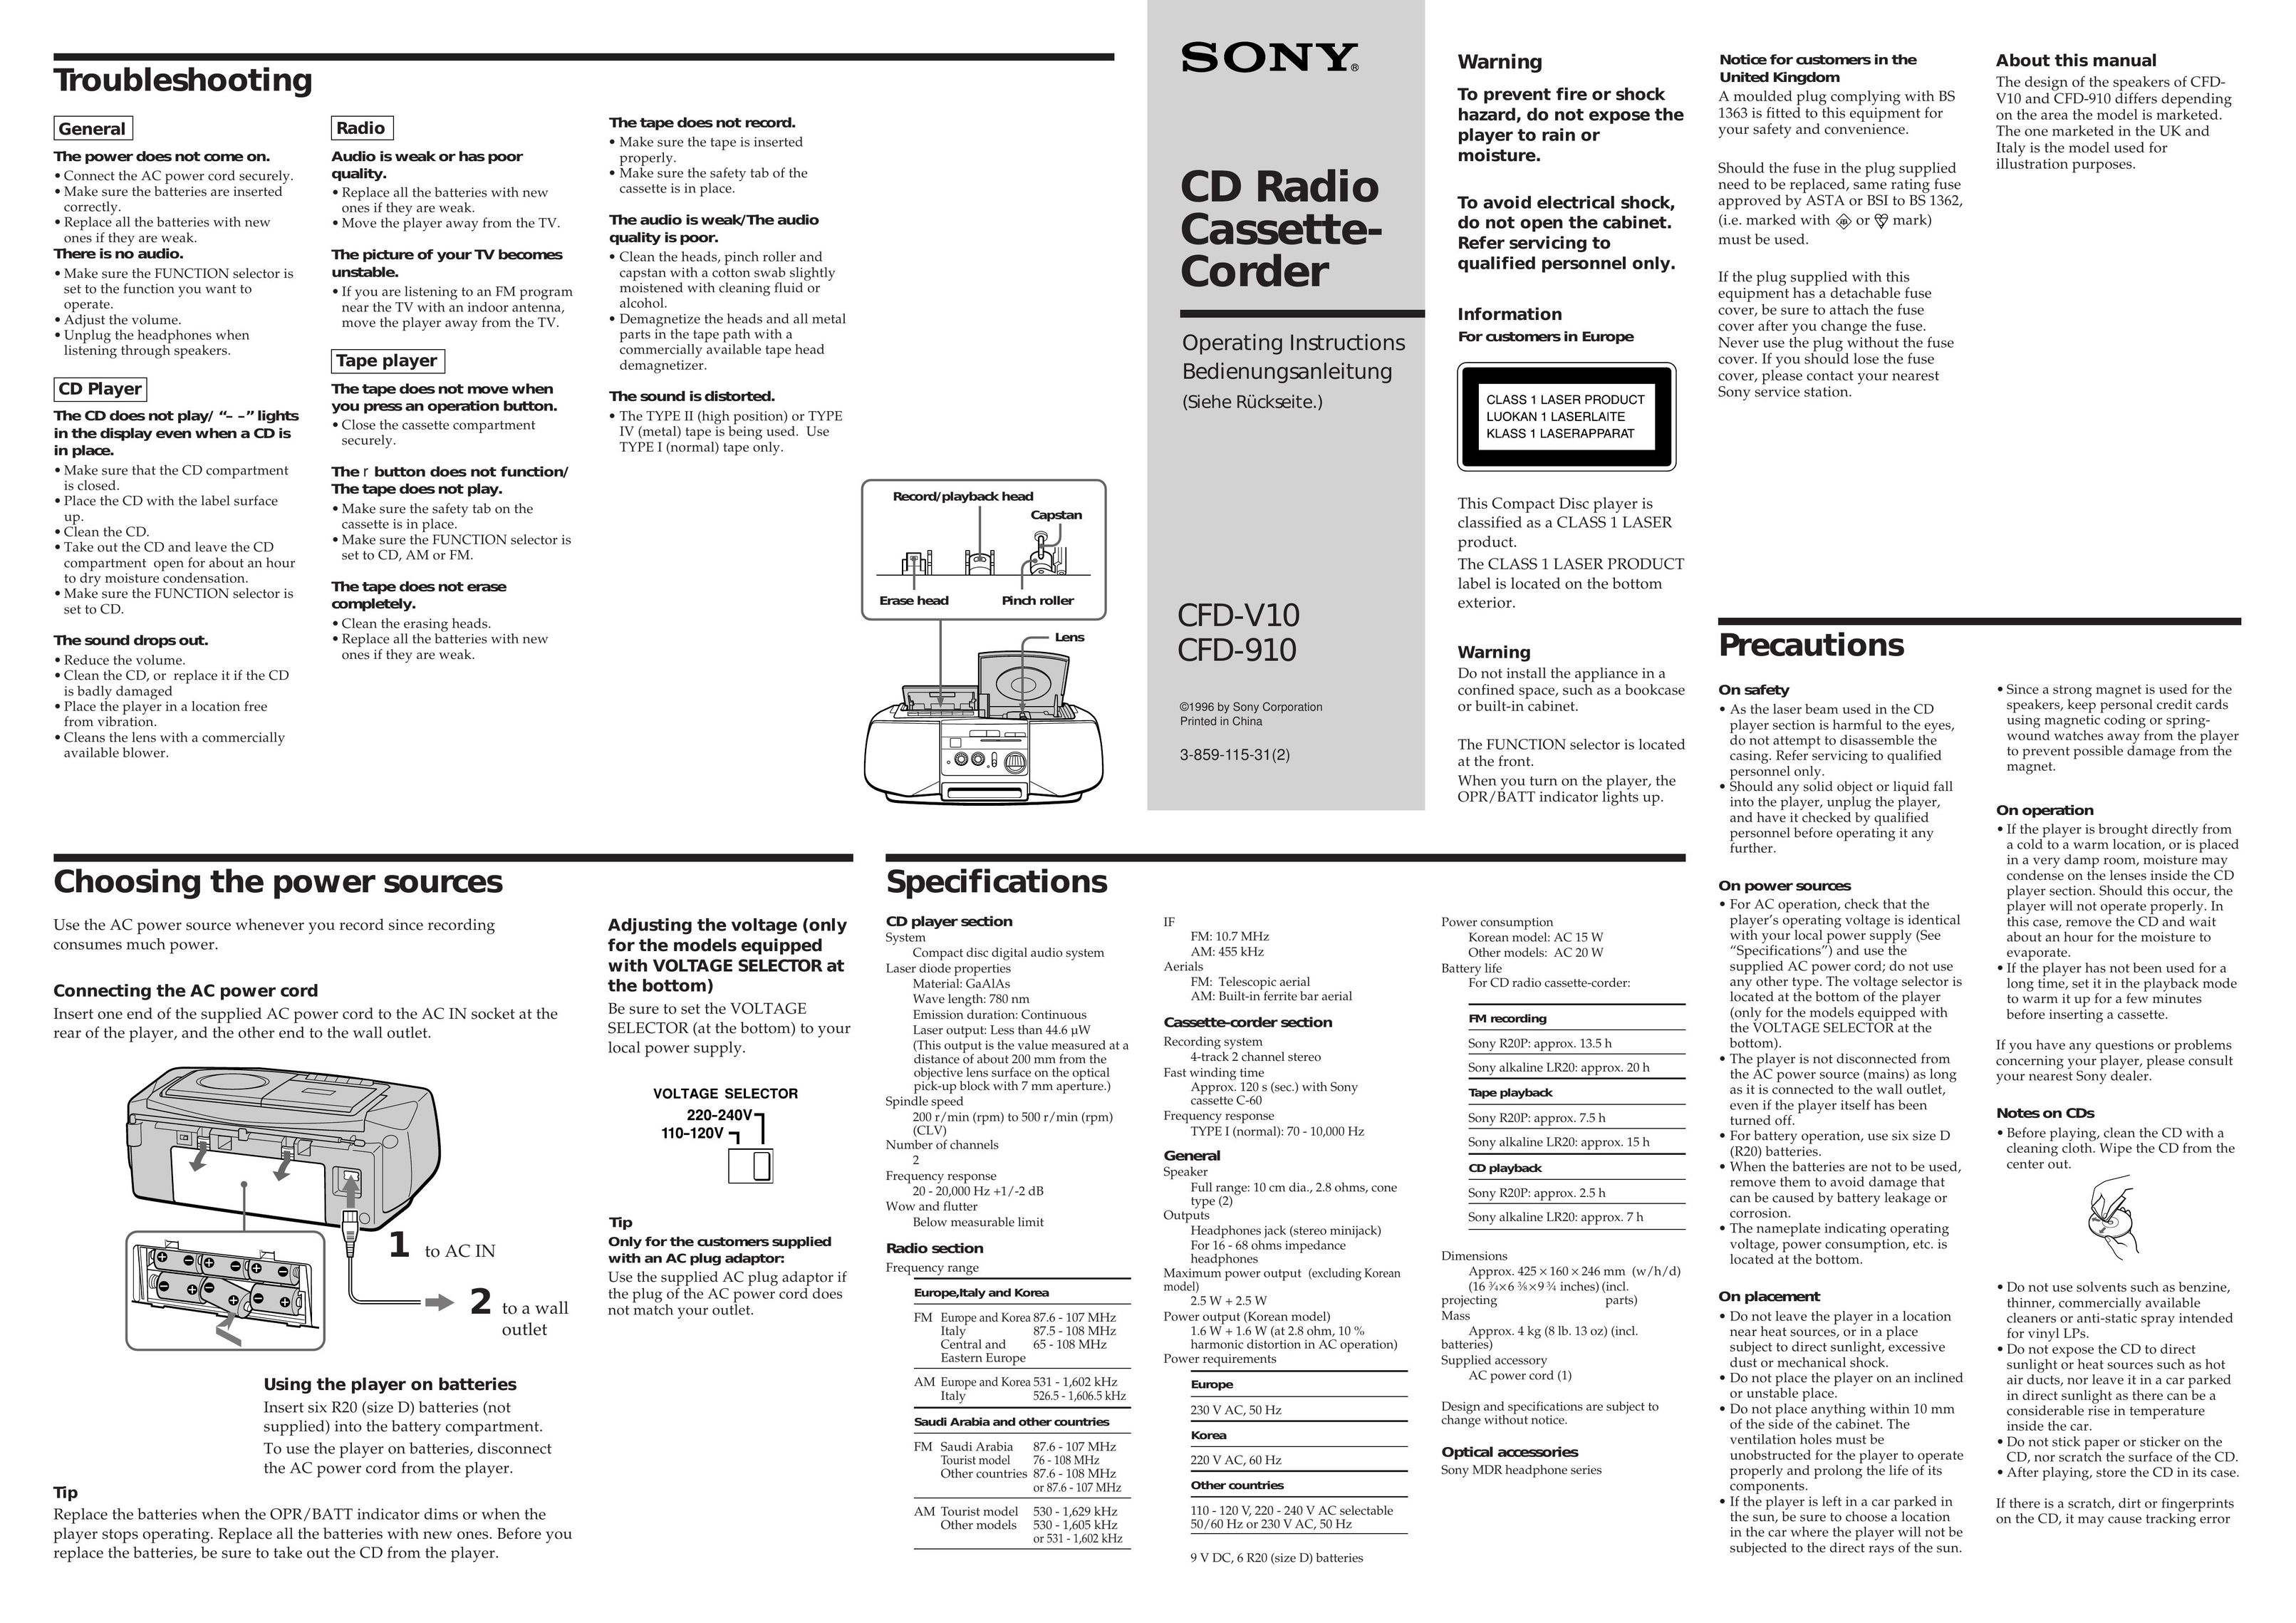 Sony CFD-910 Portable CD Player User Manual